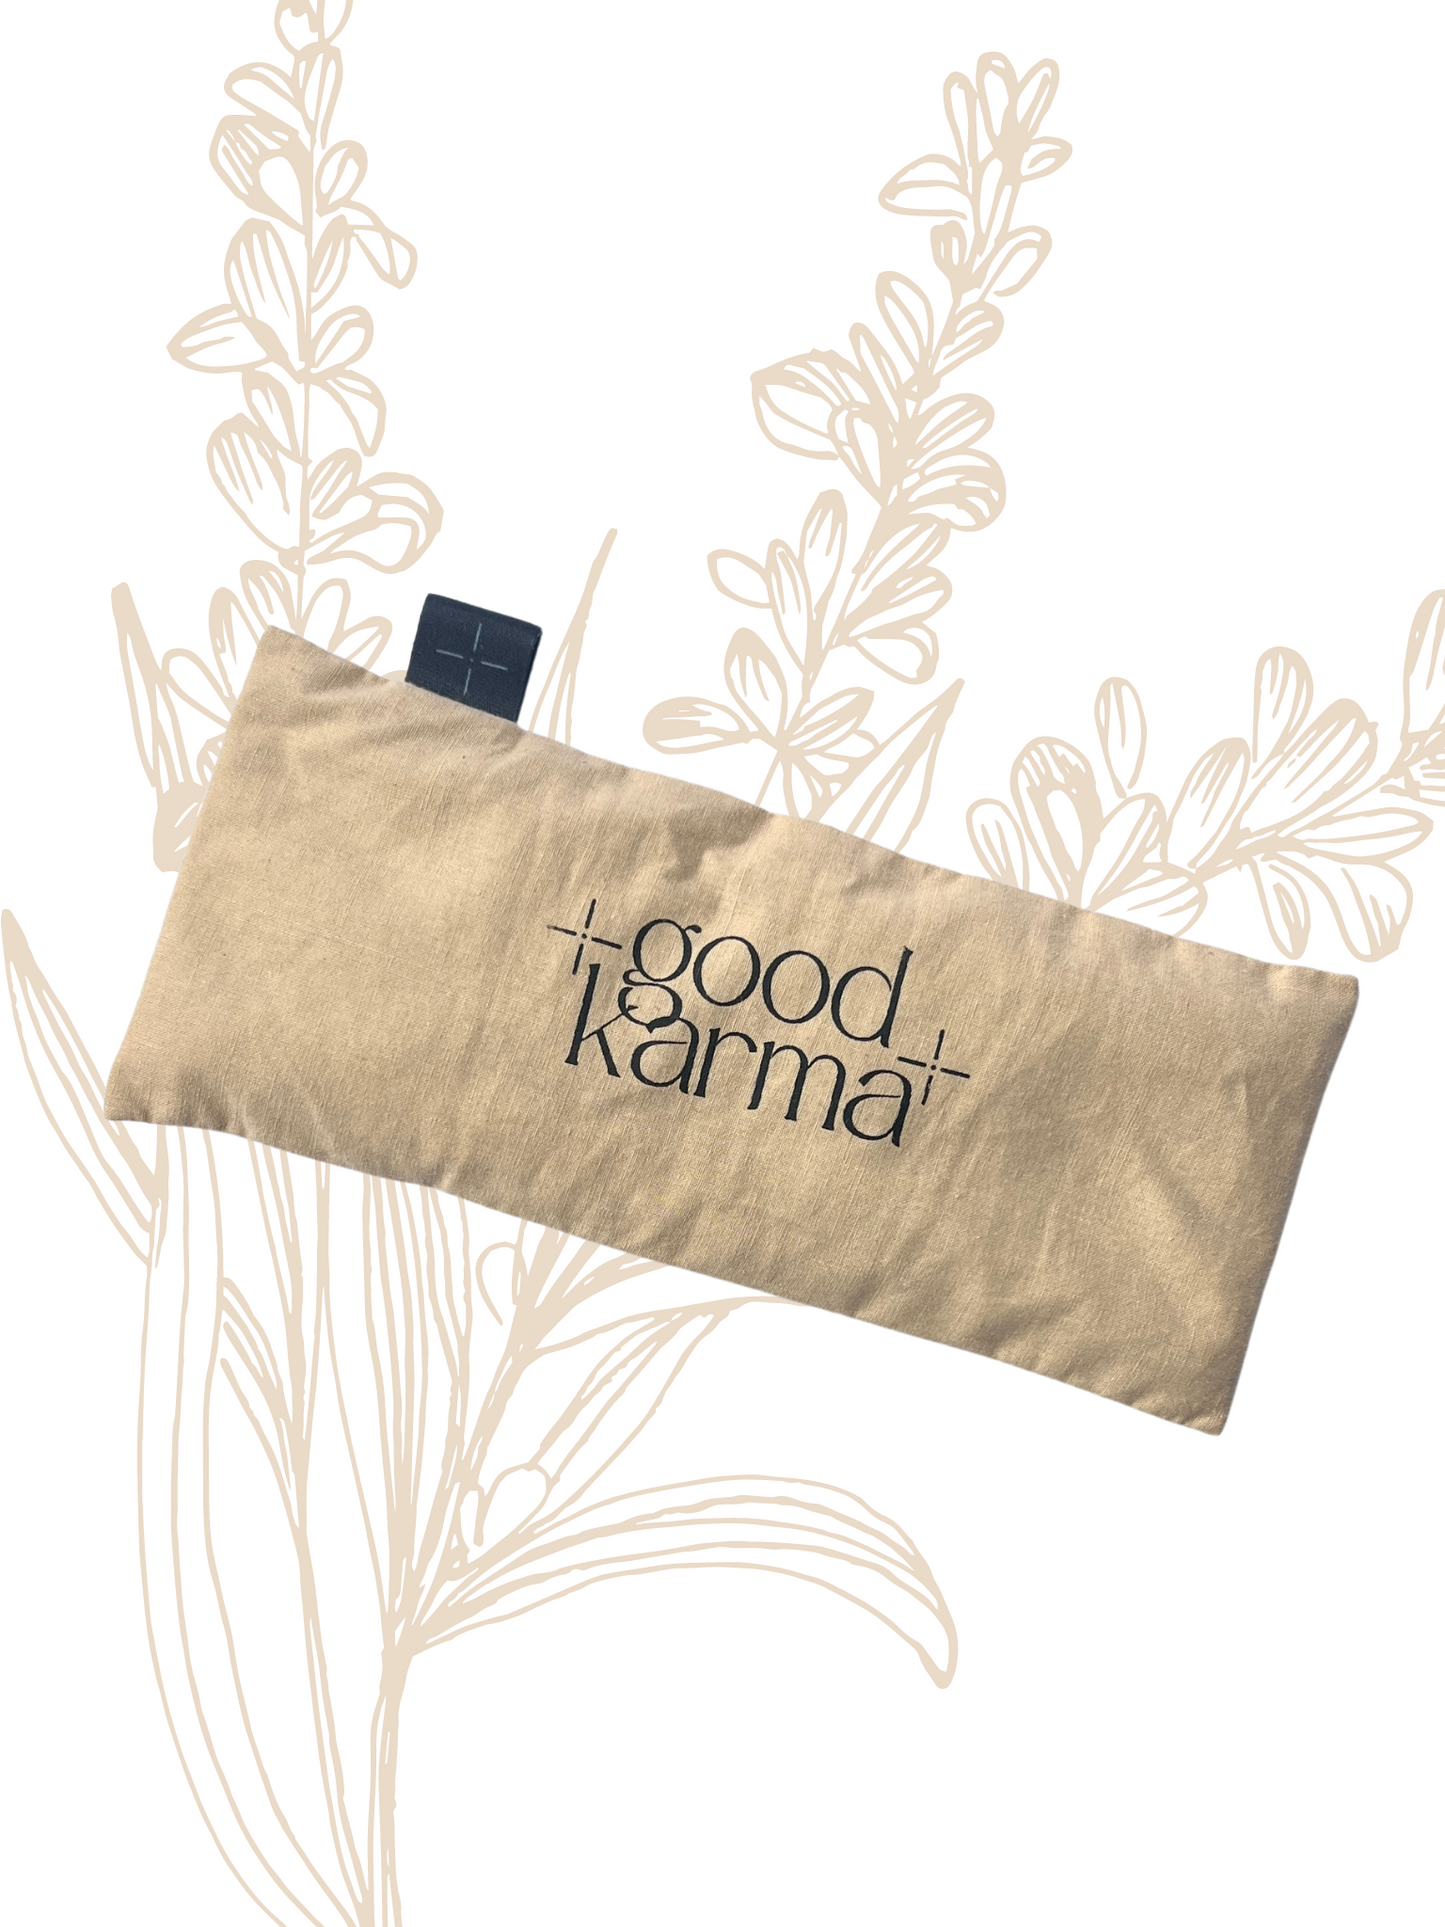 Good Karma organic flax and lavender eye pillows for meditation and relaxation beige color Eye pillow for yoga and meditation